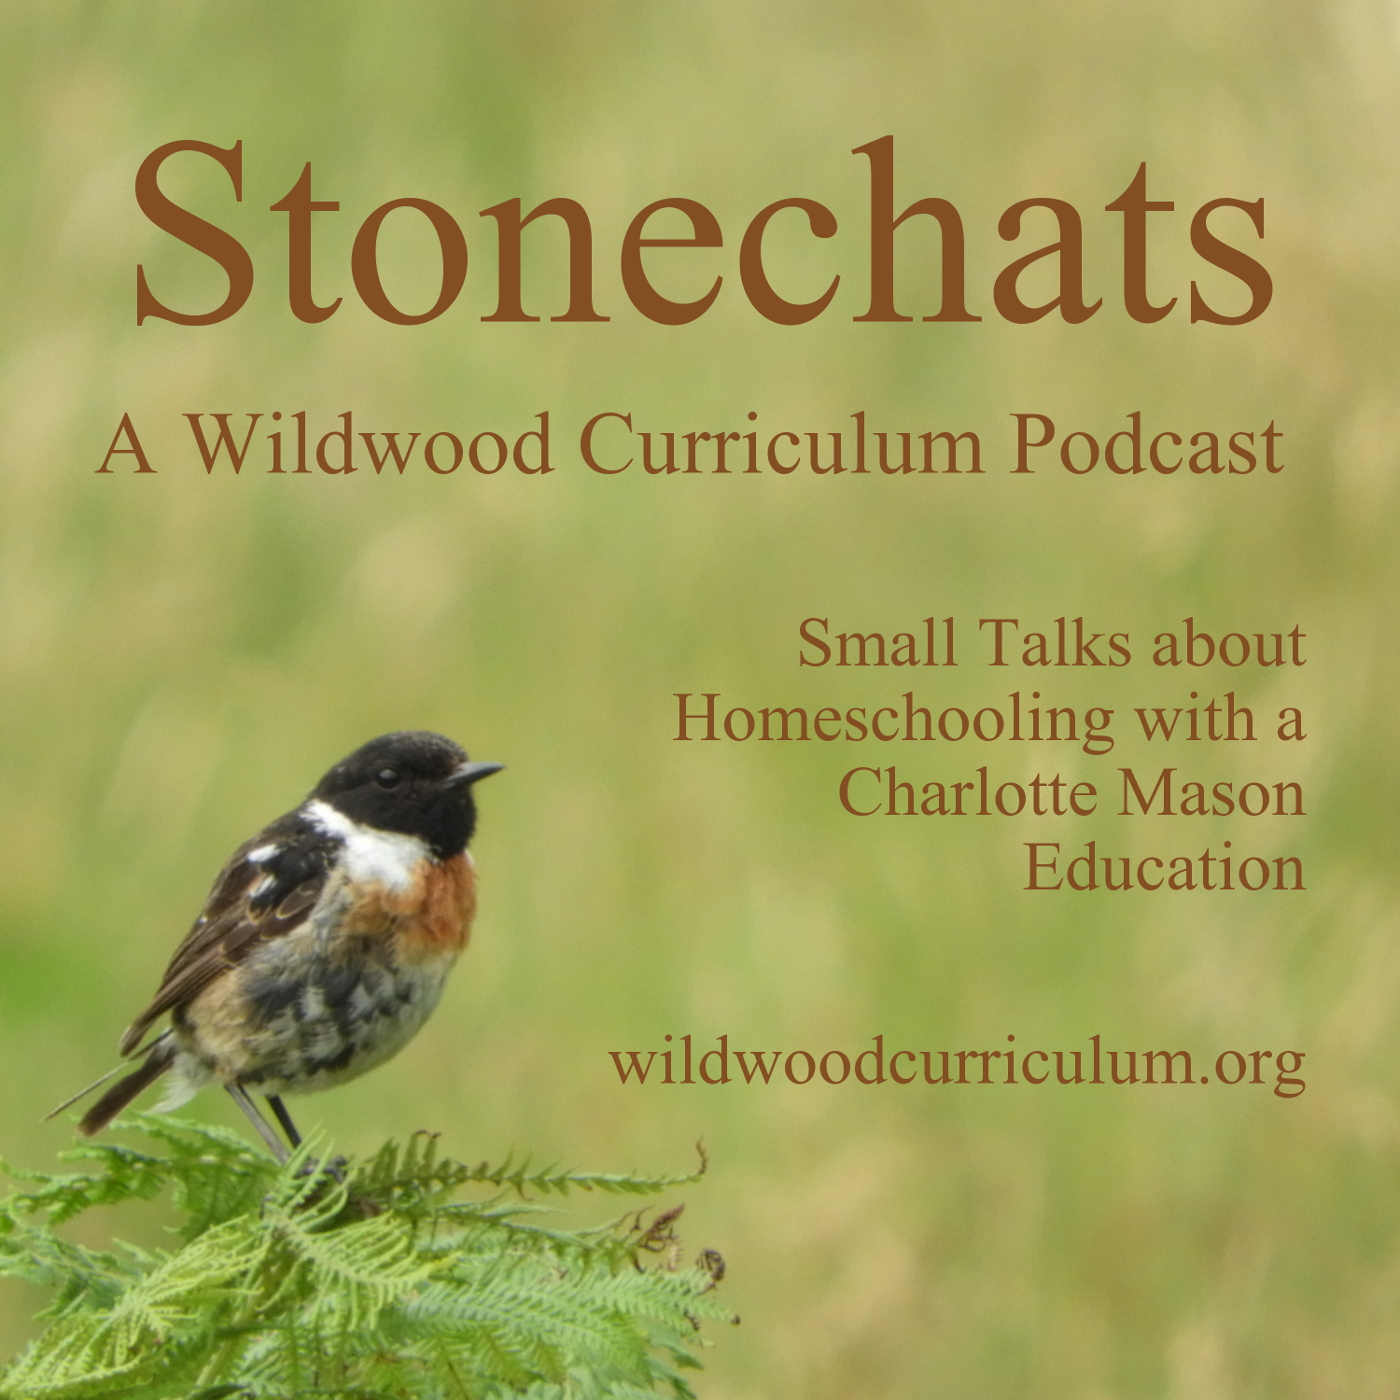 [Stonechats 9] Singing, Solfa and Kodaly with Guest RaeAnna Goss Part 2